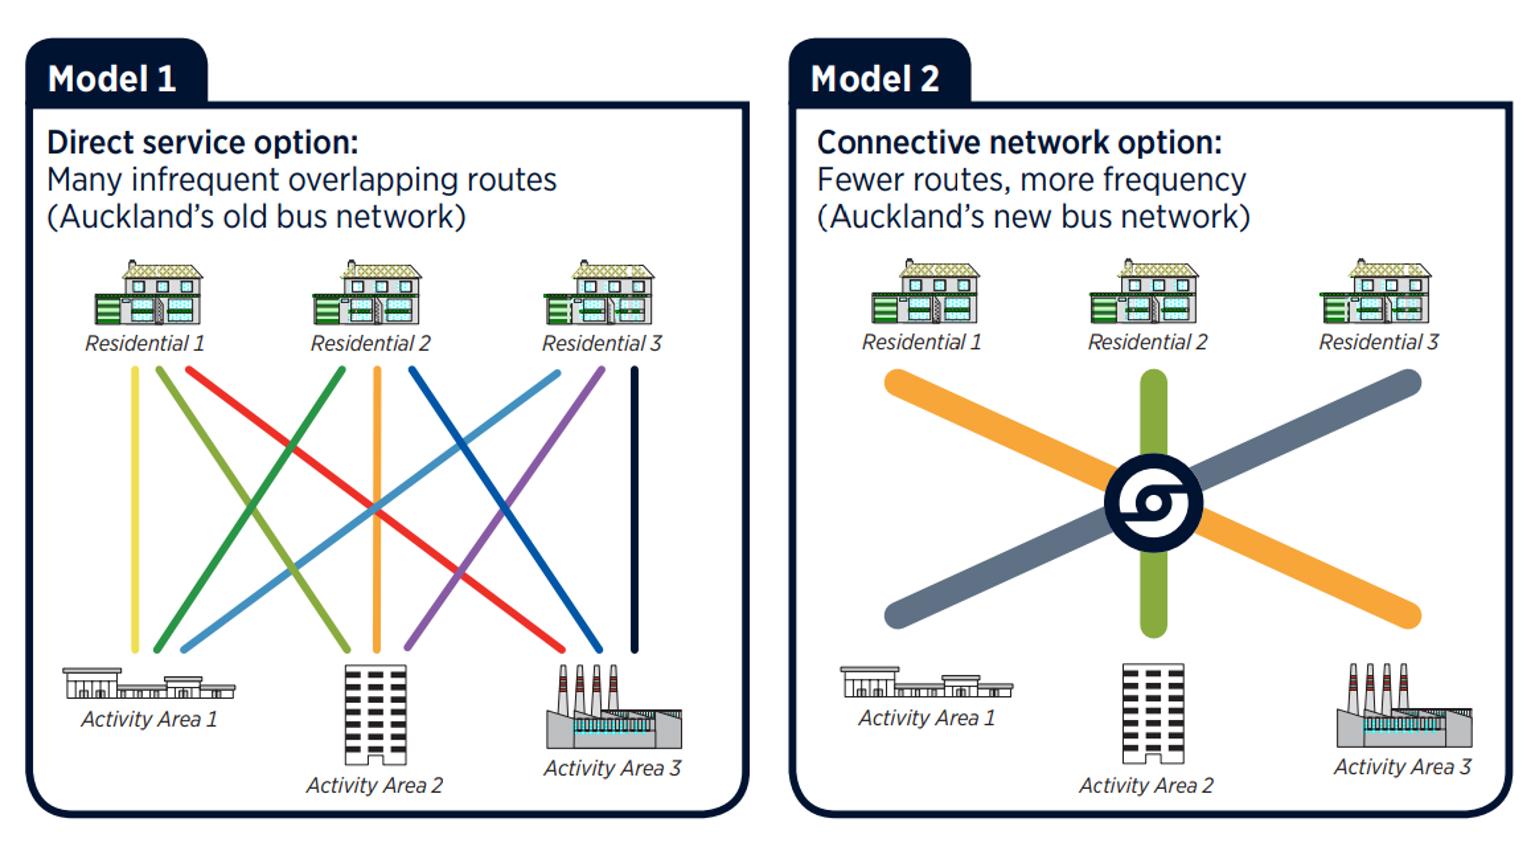 Two side by side images showing Auckland's new and old bus networks. Model 1 shows many infrequent overlapping routes from residential to activity areas. Model 2 shows a connective network option with fewer routes but more frequency and a central hub between residential and activity areas. 